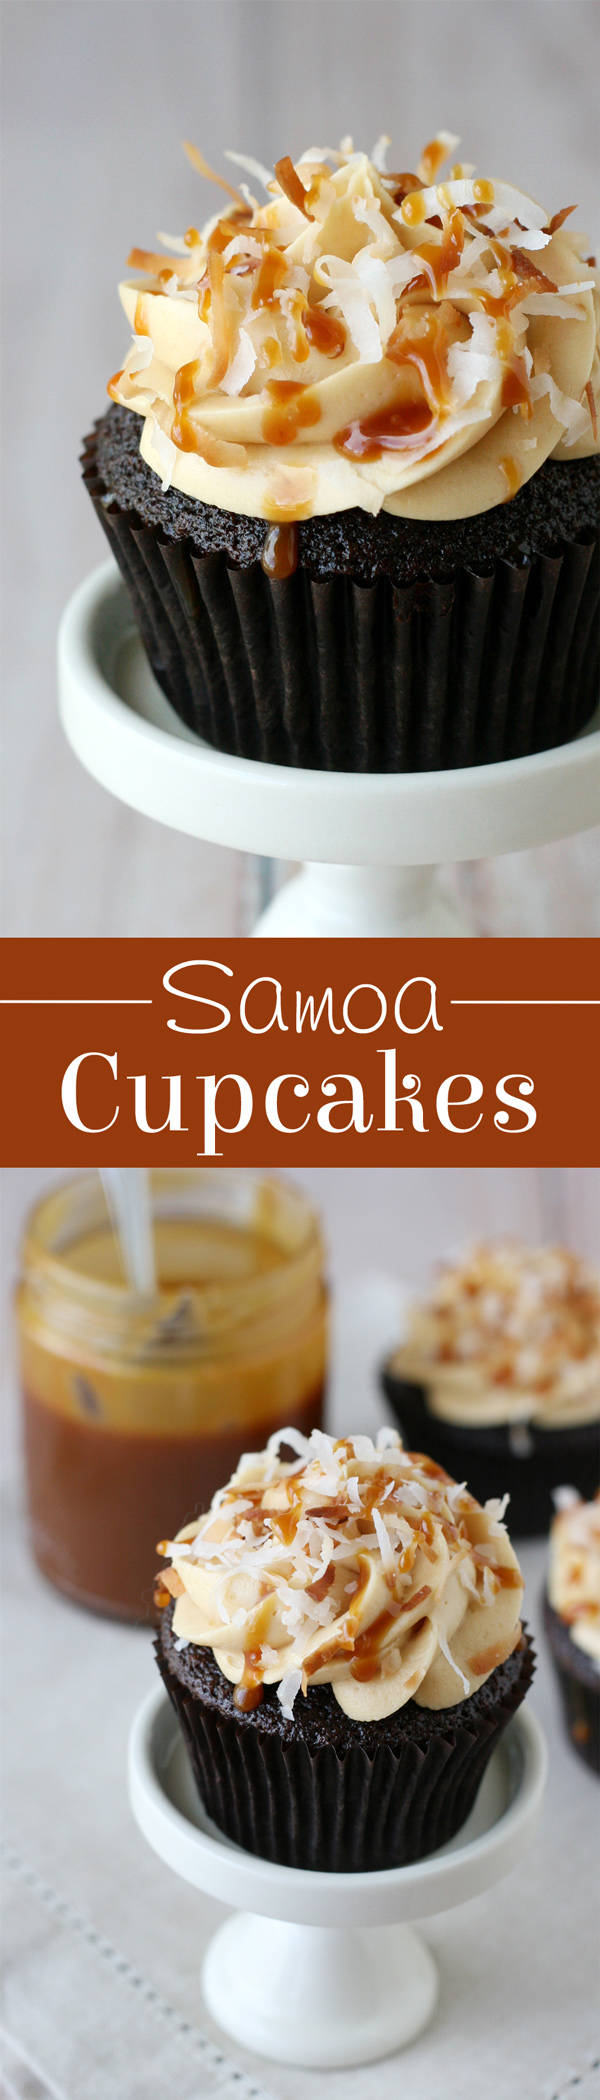 So INCREDIBLY good!! These Samoa cookie inspired cupcakes are chocolate cupcakes topped with salted caramel buttercream and toasted coconut!